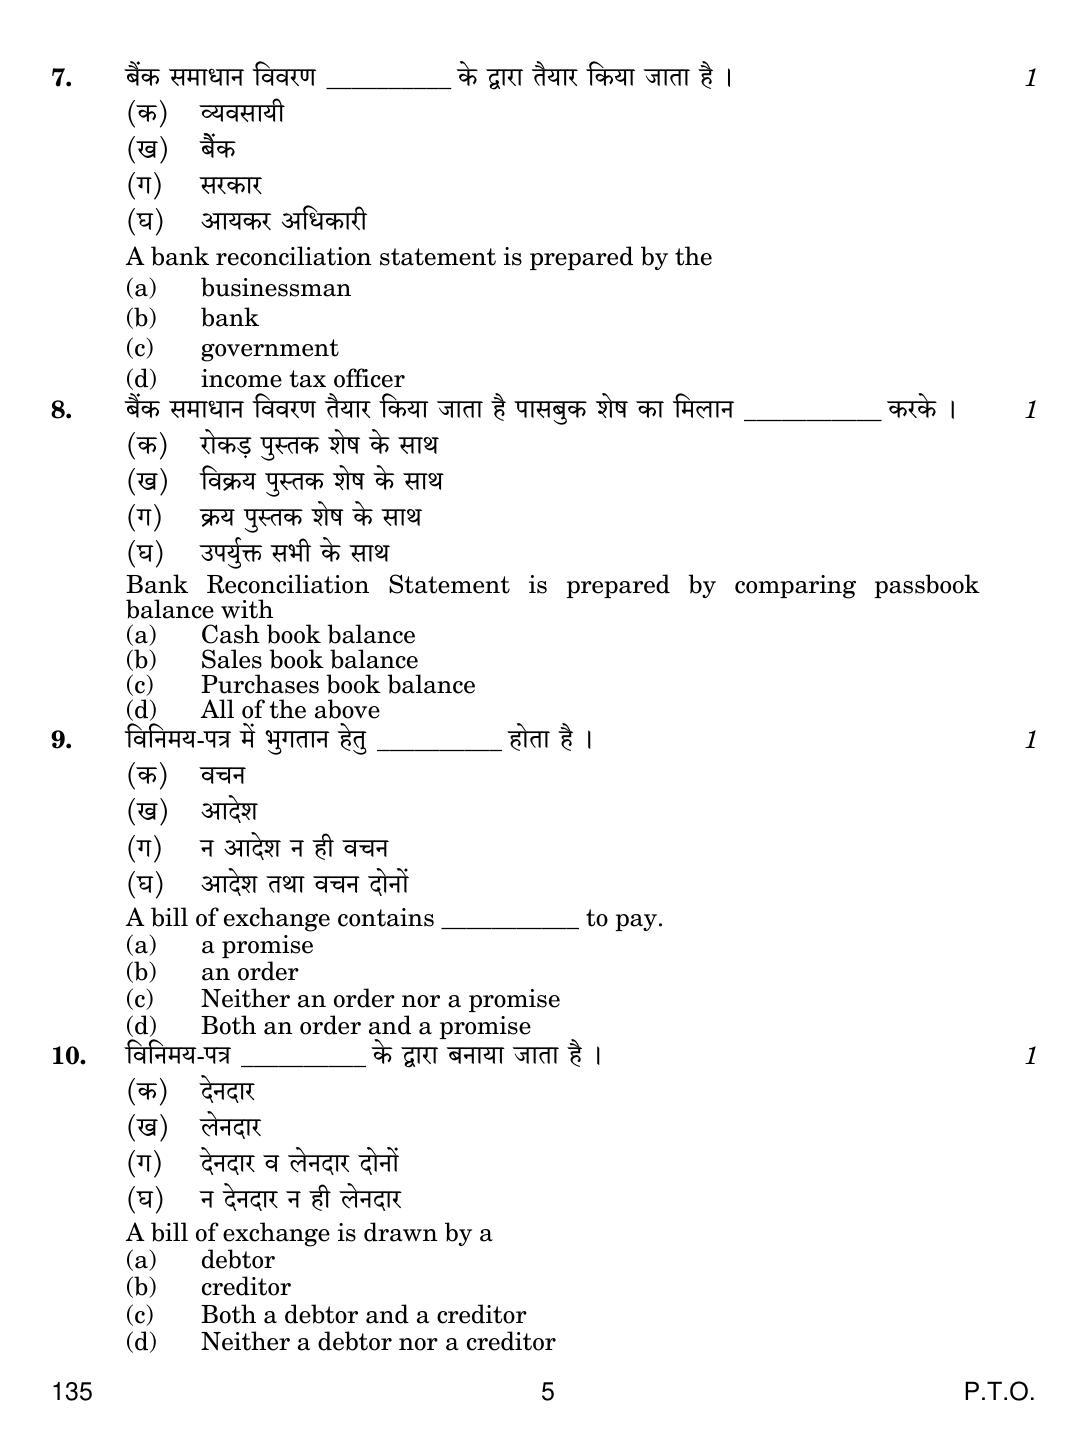 CBSE Class 10 135 ELEMENTS OF BOOK-KEEPING AND ACCOUNTANCY (COMMERCE) 2019 Question Paper - Page 5